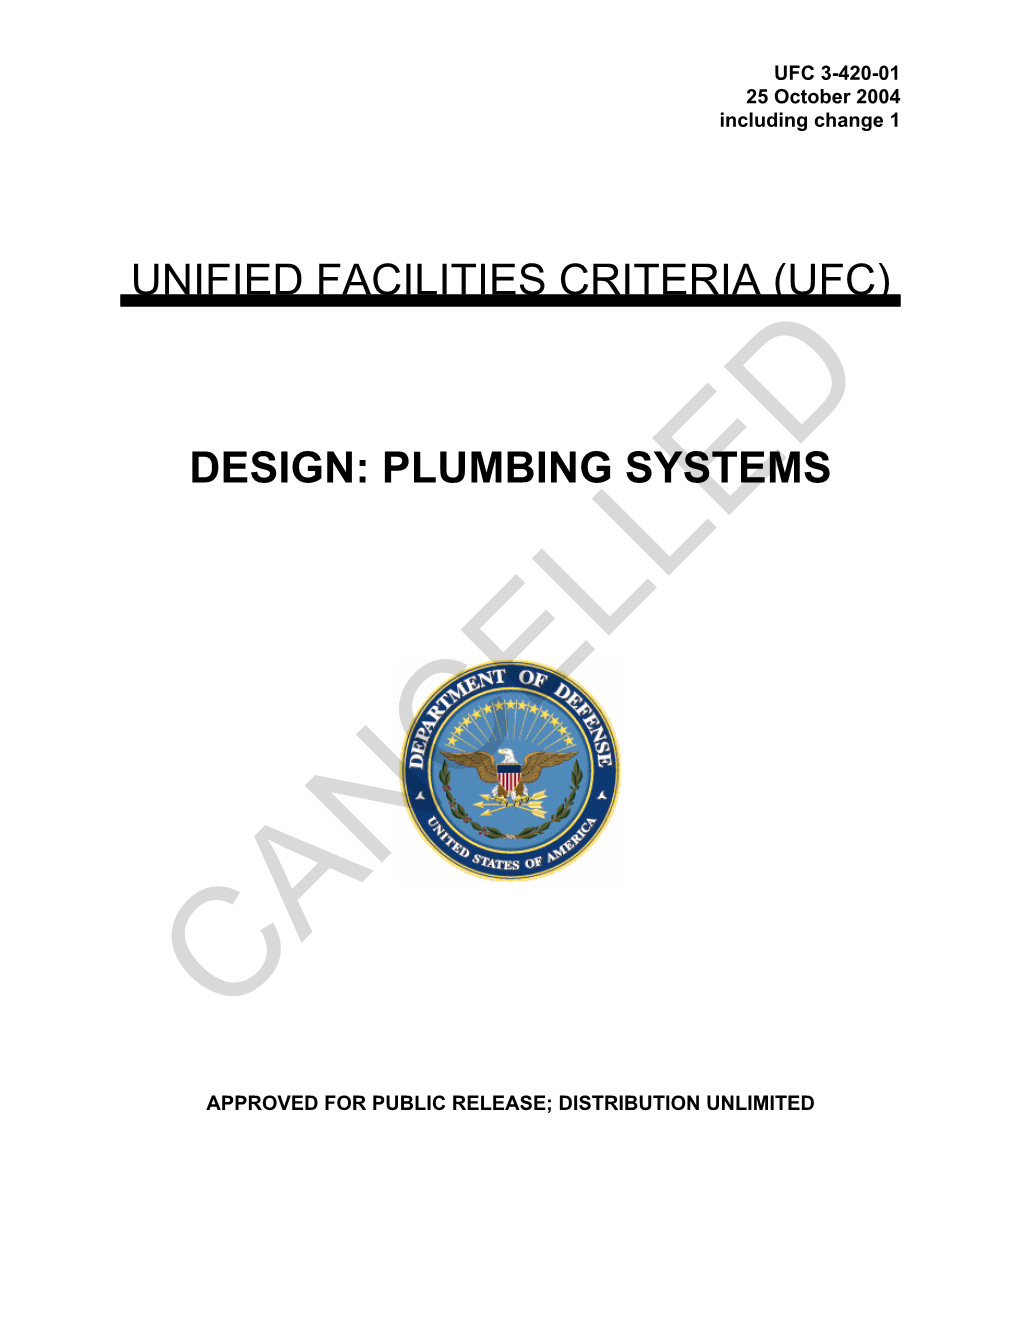 UFC 3-420-01 Plumbing Systems, with Change 1 (10-25-2004)